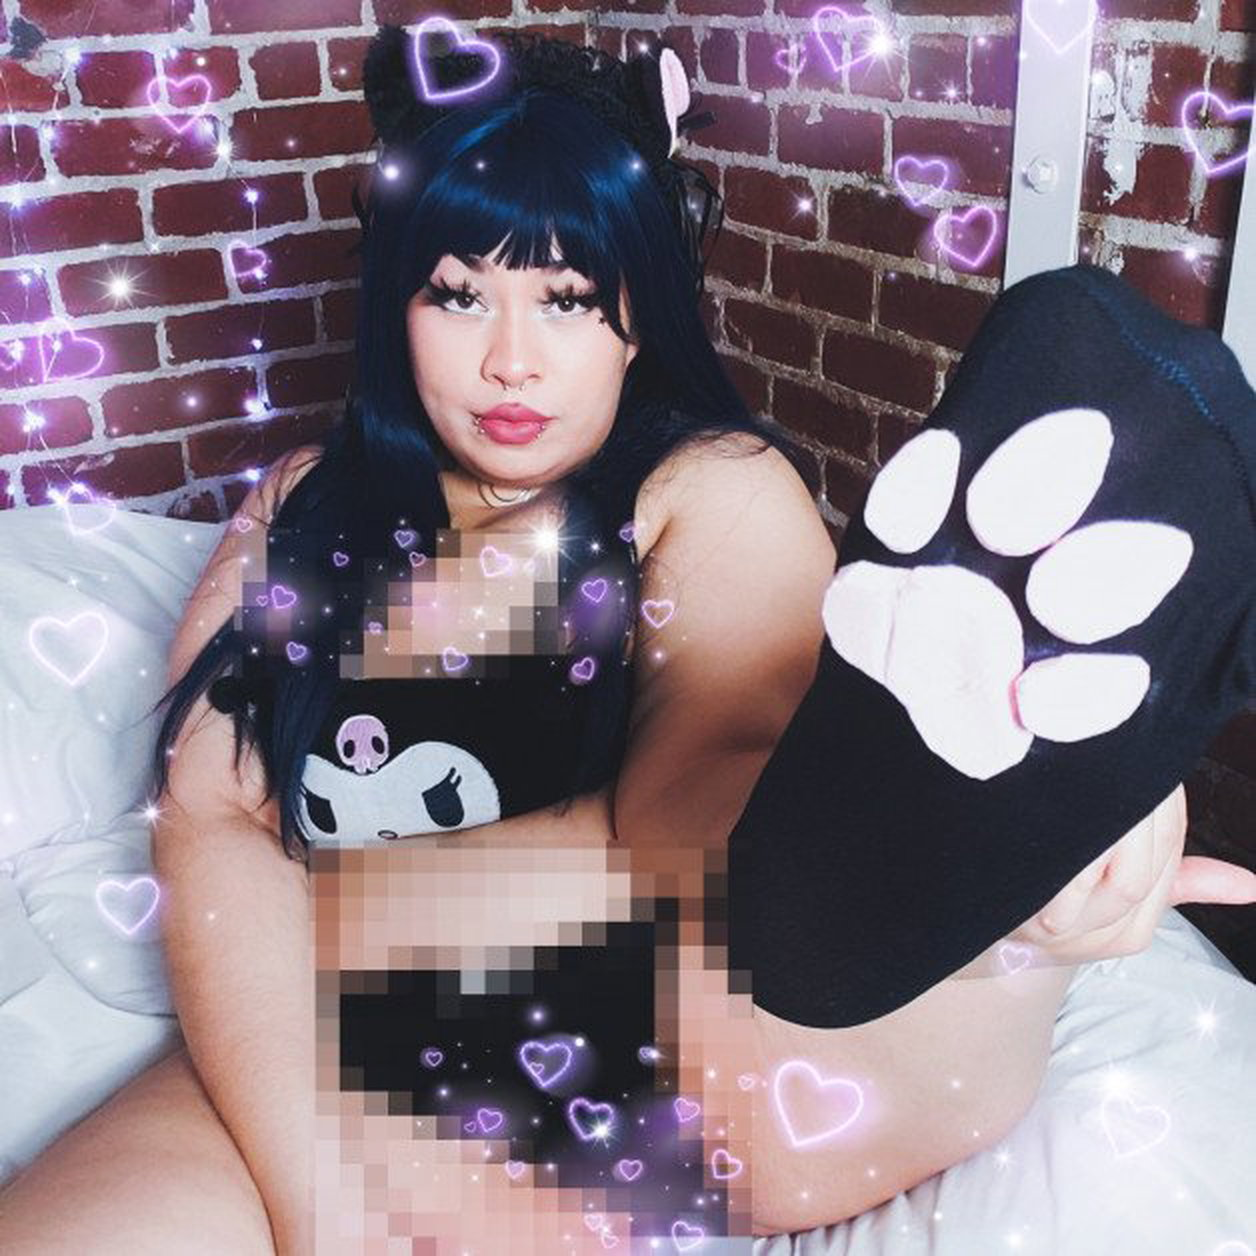 Photo by Gothicc_Waifu with the username @GothiccWaifu, who is a star user,  March 23, 2022 at 9:25 PM. The post is about the topic Alternative Models and the text says 'Toe Beans! 🖤


#gothgirl #altgirl #alternative #egirl'